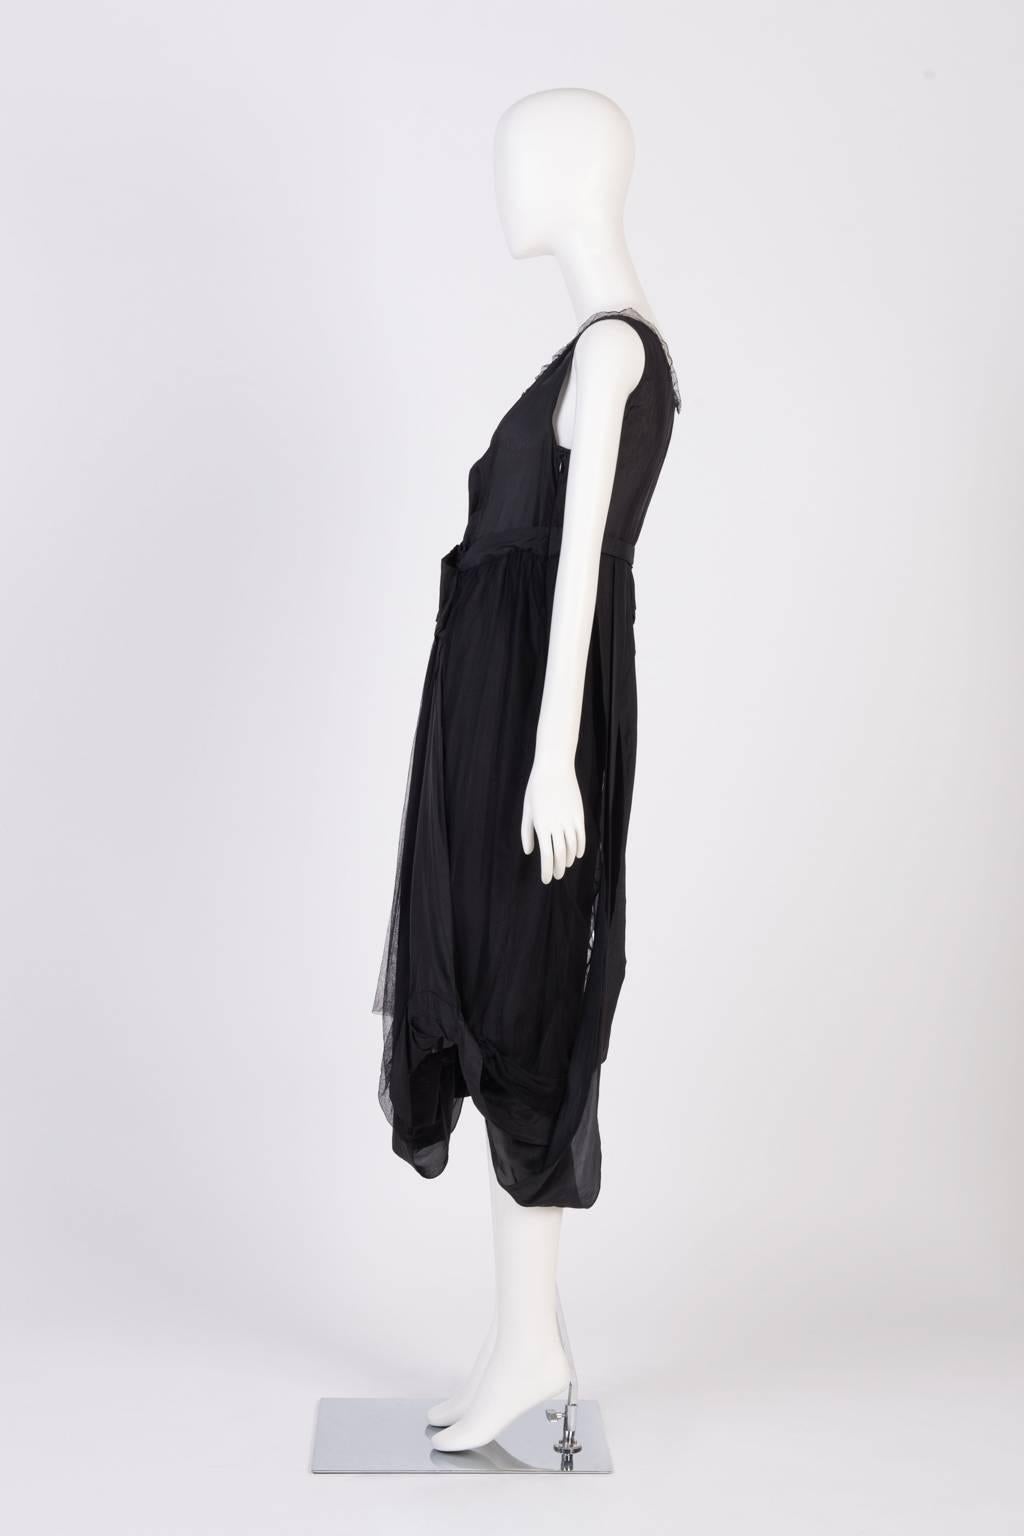 Black Sharon Wauchob Layered Tulle Dress For Sale